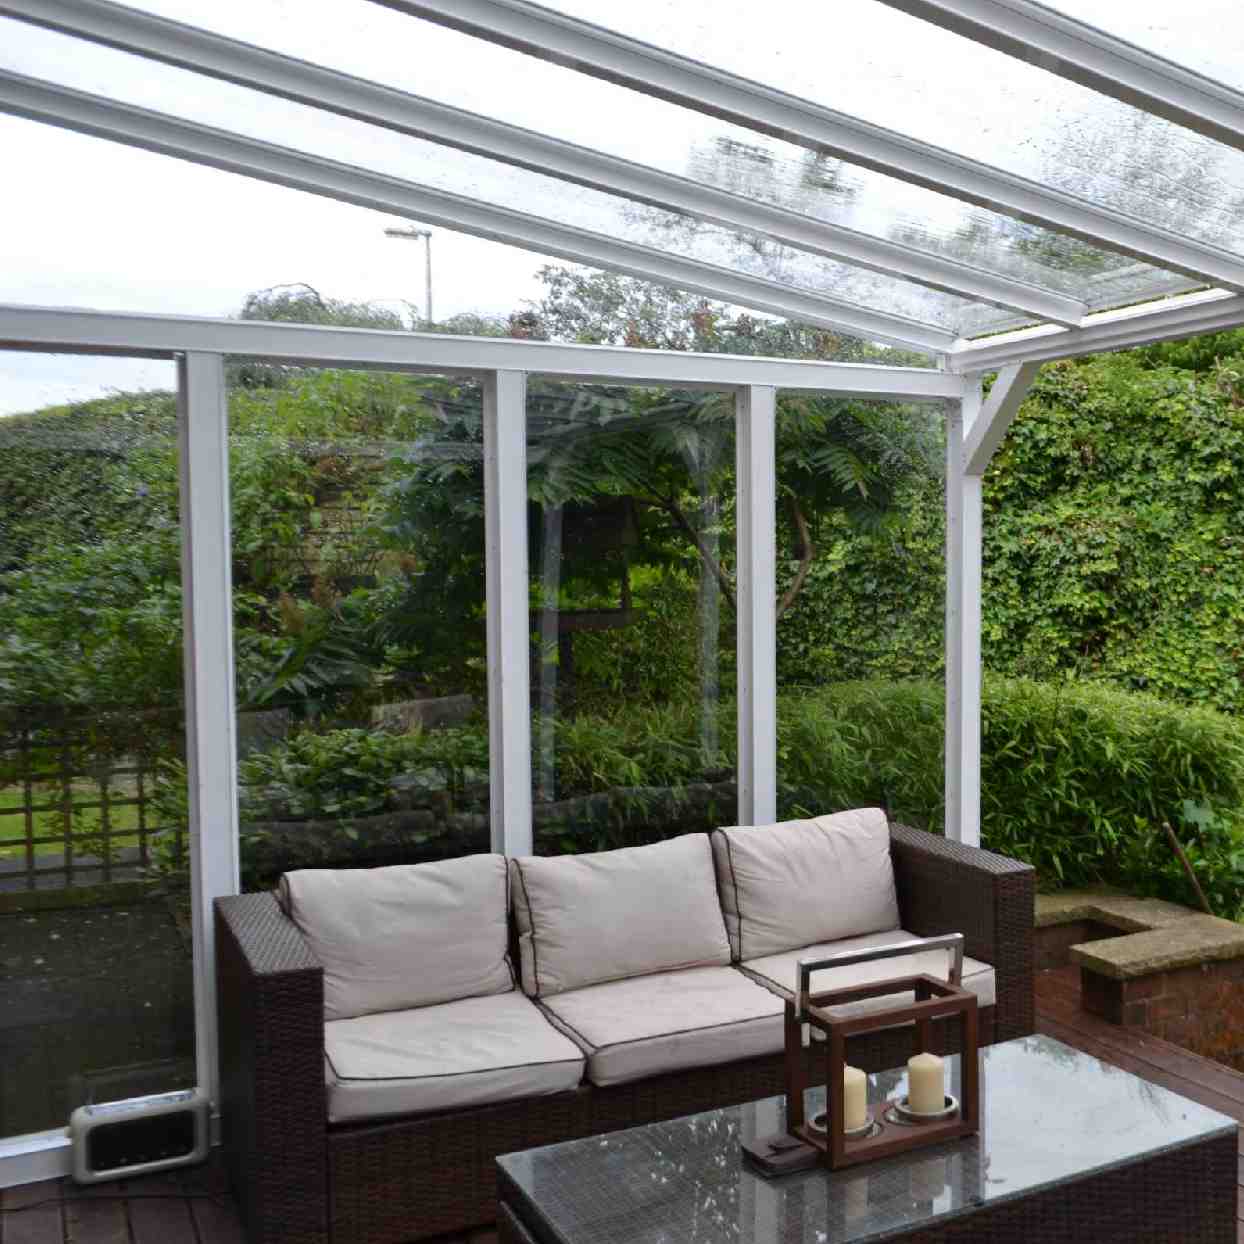 Buy Omega Verandah White with 6mm Glass Clear Plate Polycarbonate Glazing - 2.8m (W) x 2.5m (P), (2) Supporting Posts online today